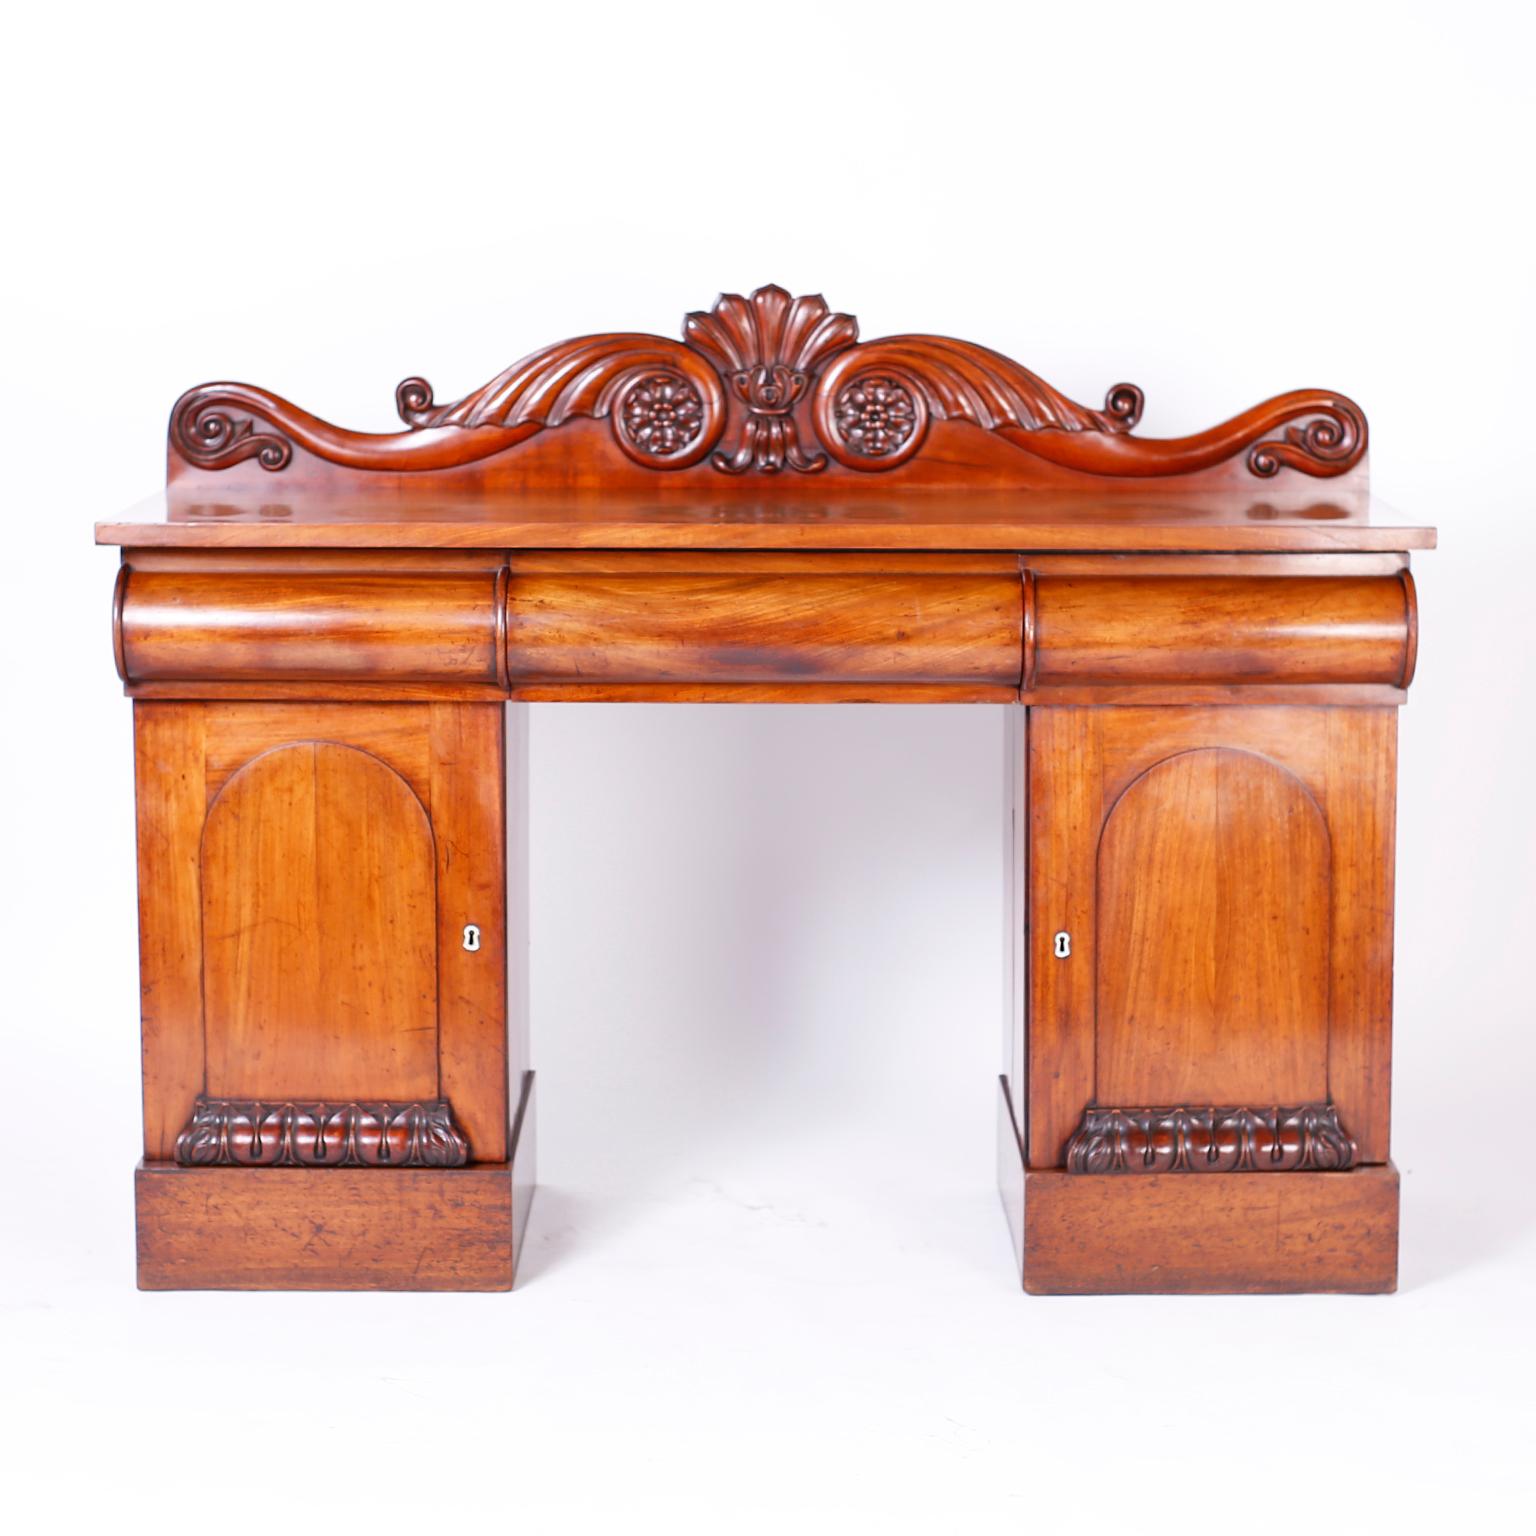 Antique William IV style sideboard reminiscent of a West Indies British Colonial server or buffet crafted in indigenous mahogany with a graceful carved backsplash, well grained top, three convex drawer fronts and cabinet doors with carved acanthus